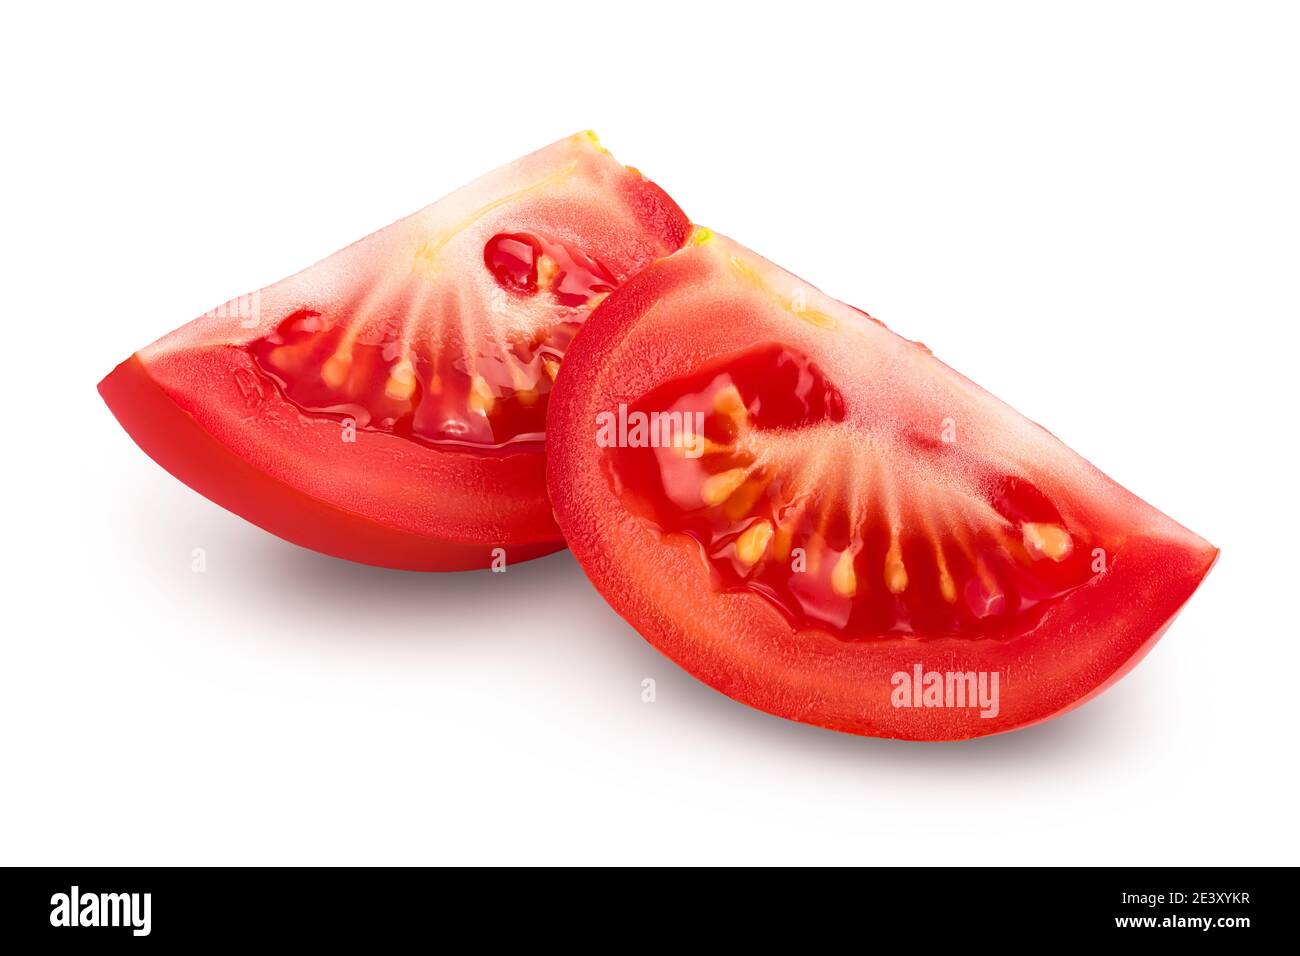 Tomato slices isolated on white background with clipping path and full depth of field. Stock Photo